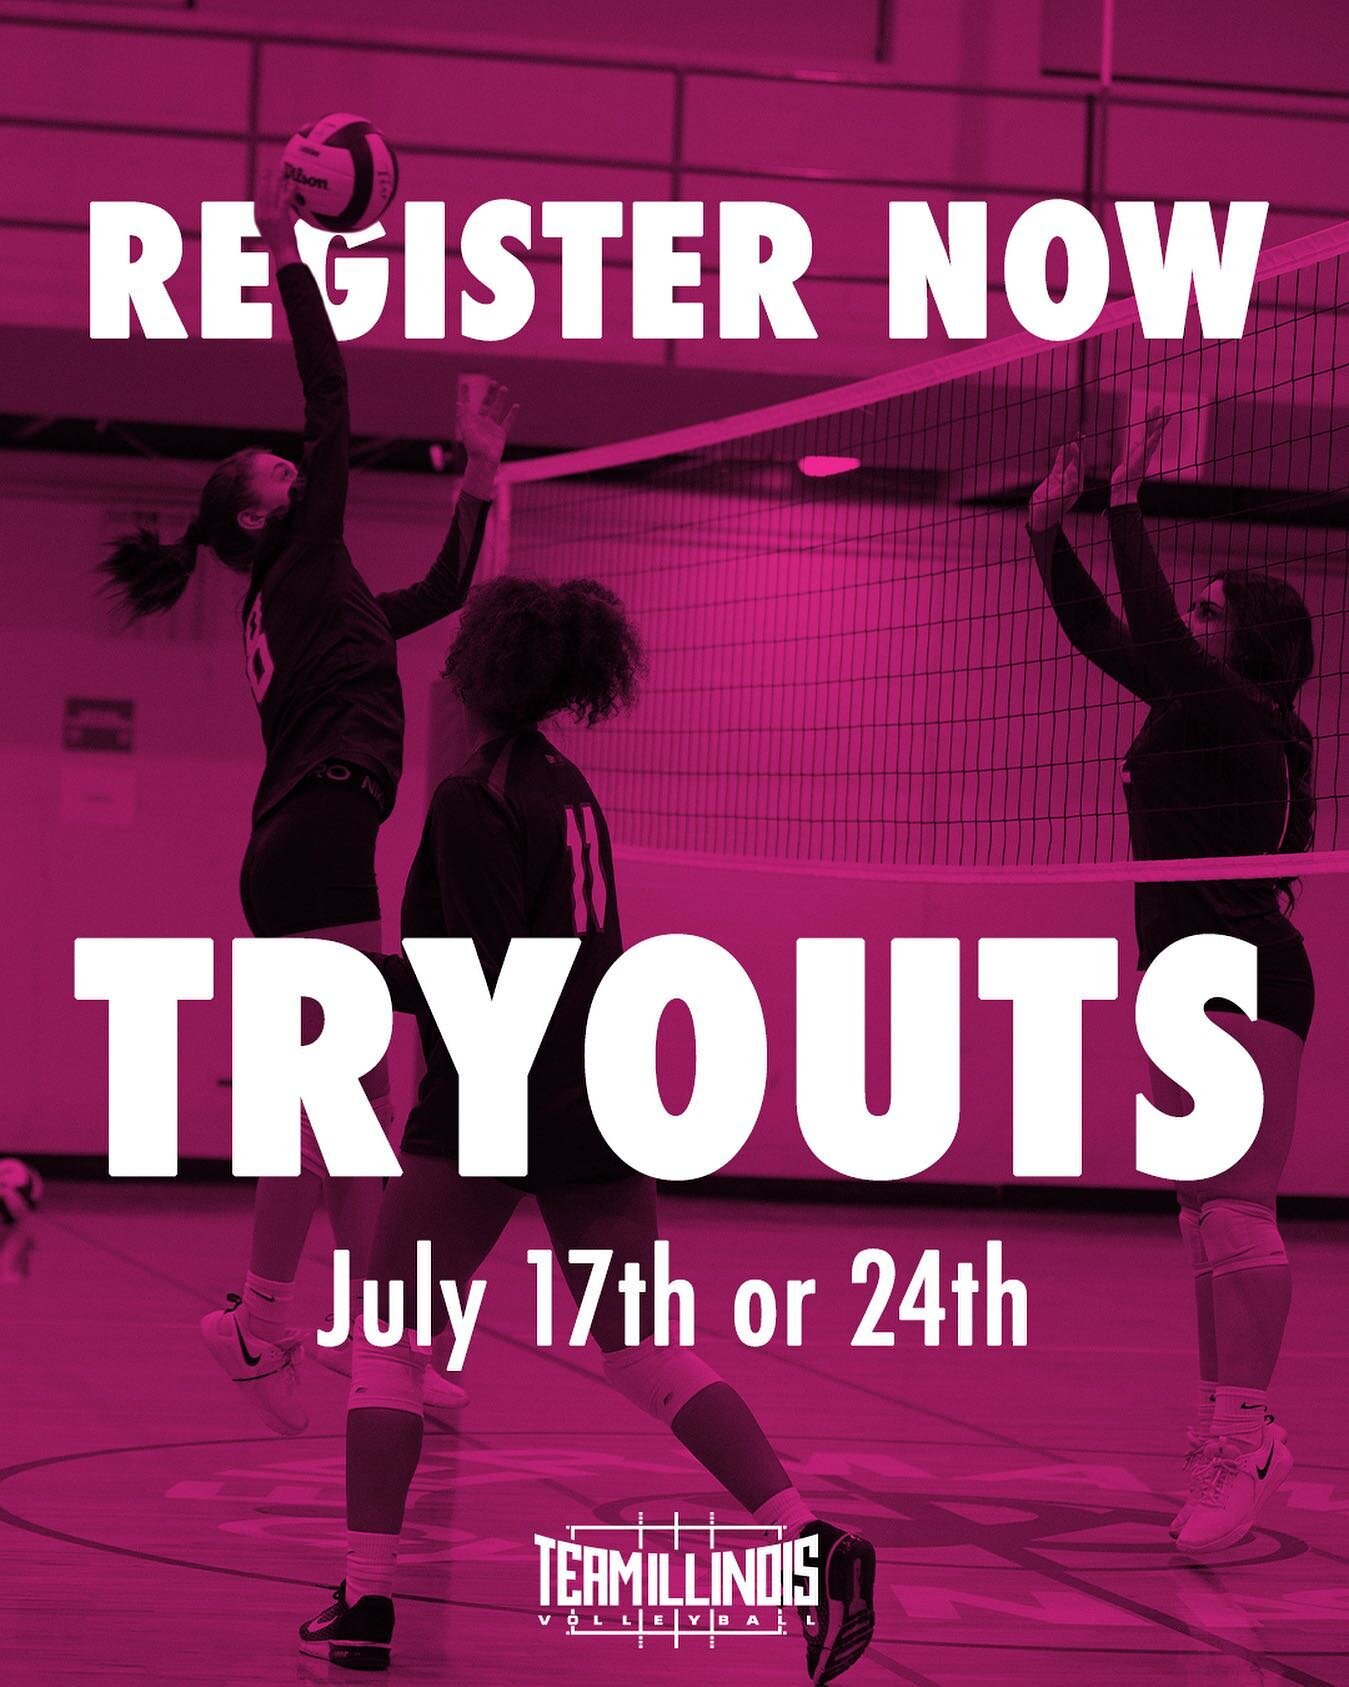 TRYOUTS are here!!!!!

Register for the summer tryouts with Team Illinois Volleyball

Happening on July 17th or 24th

You can attend either day.

Register now at teamillinoisvbc.com/register

LINK IN BIO

#Volleyball #ClubVolleyball #VolleyballClub